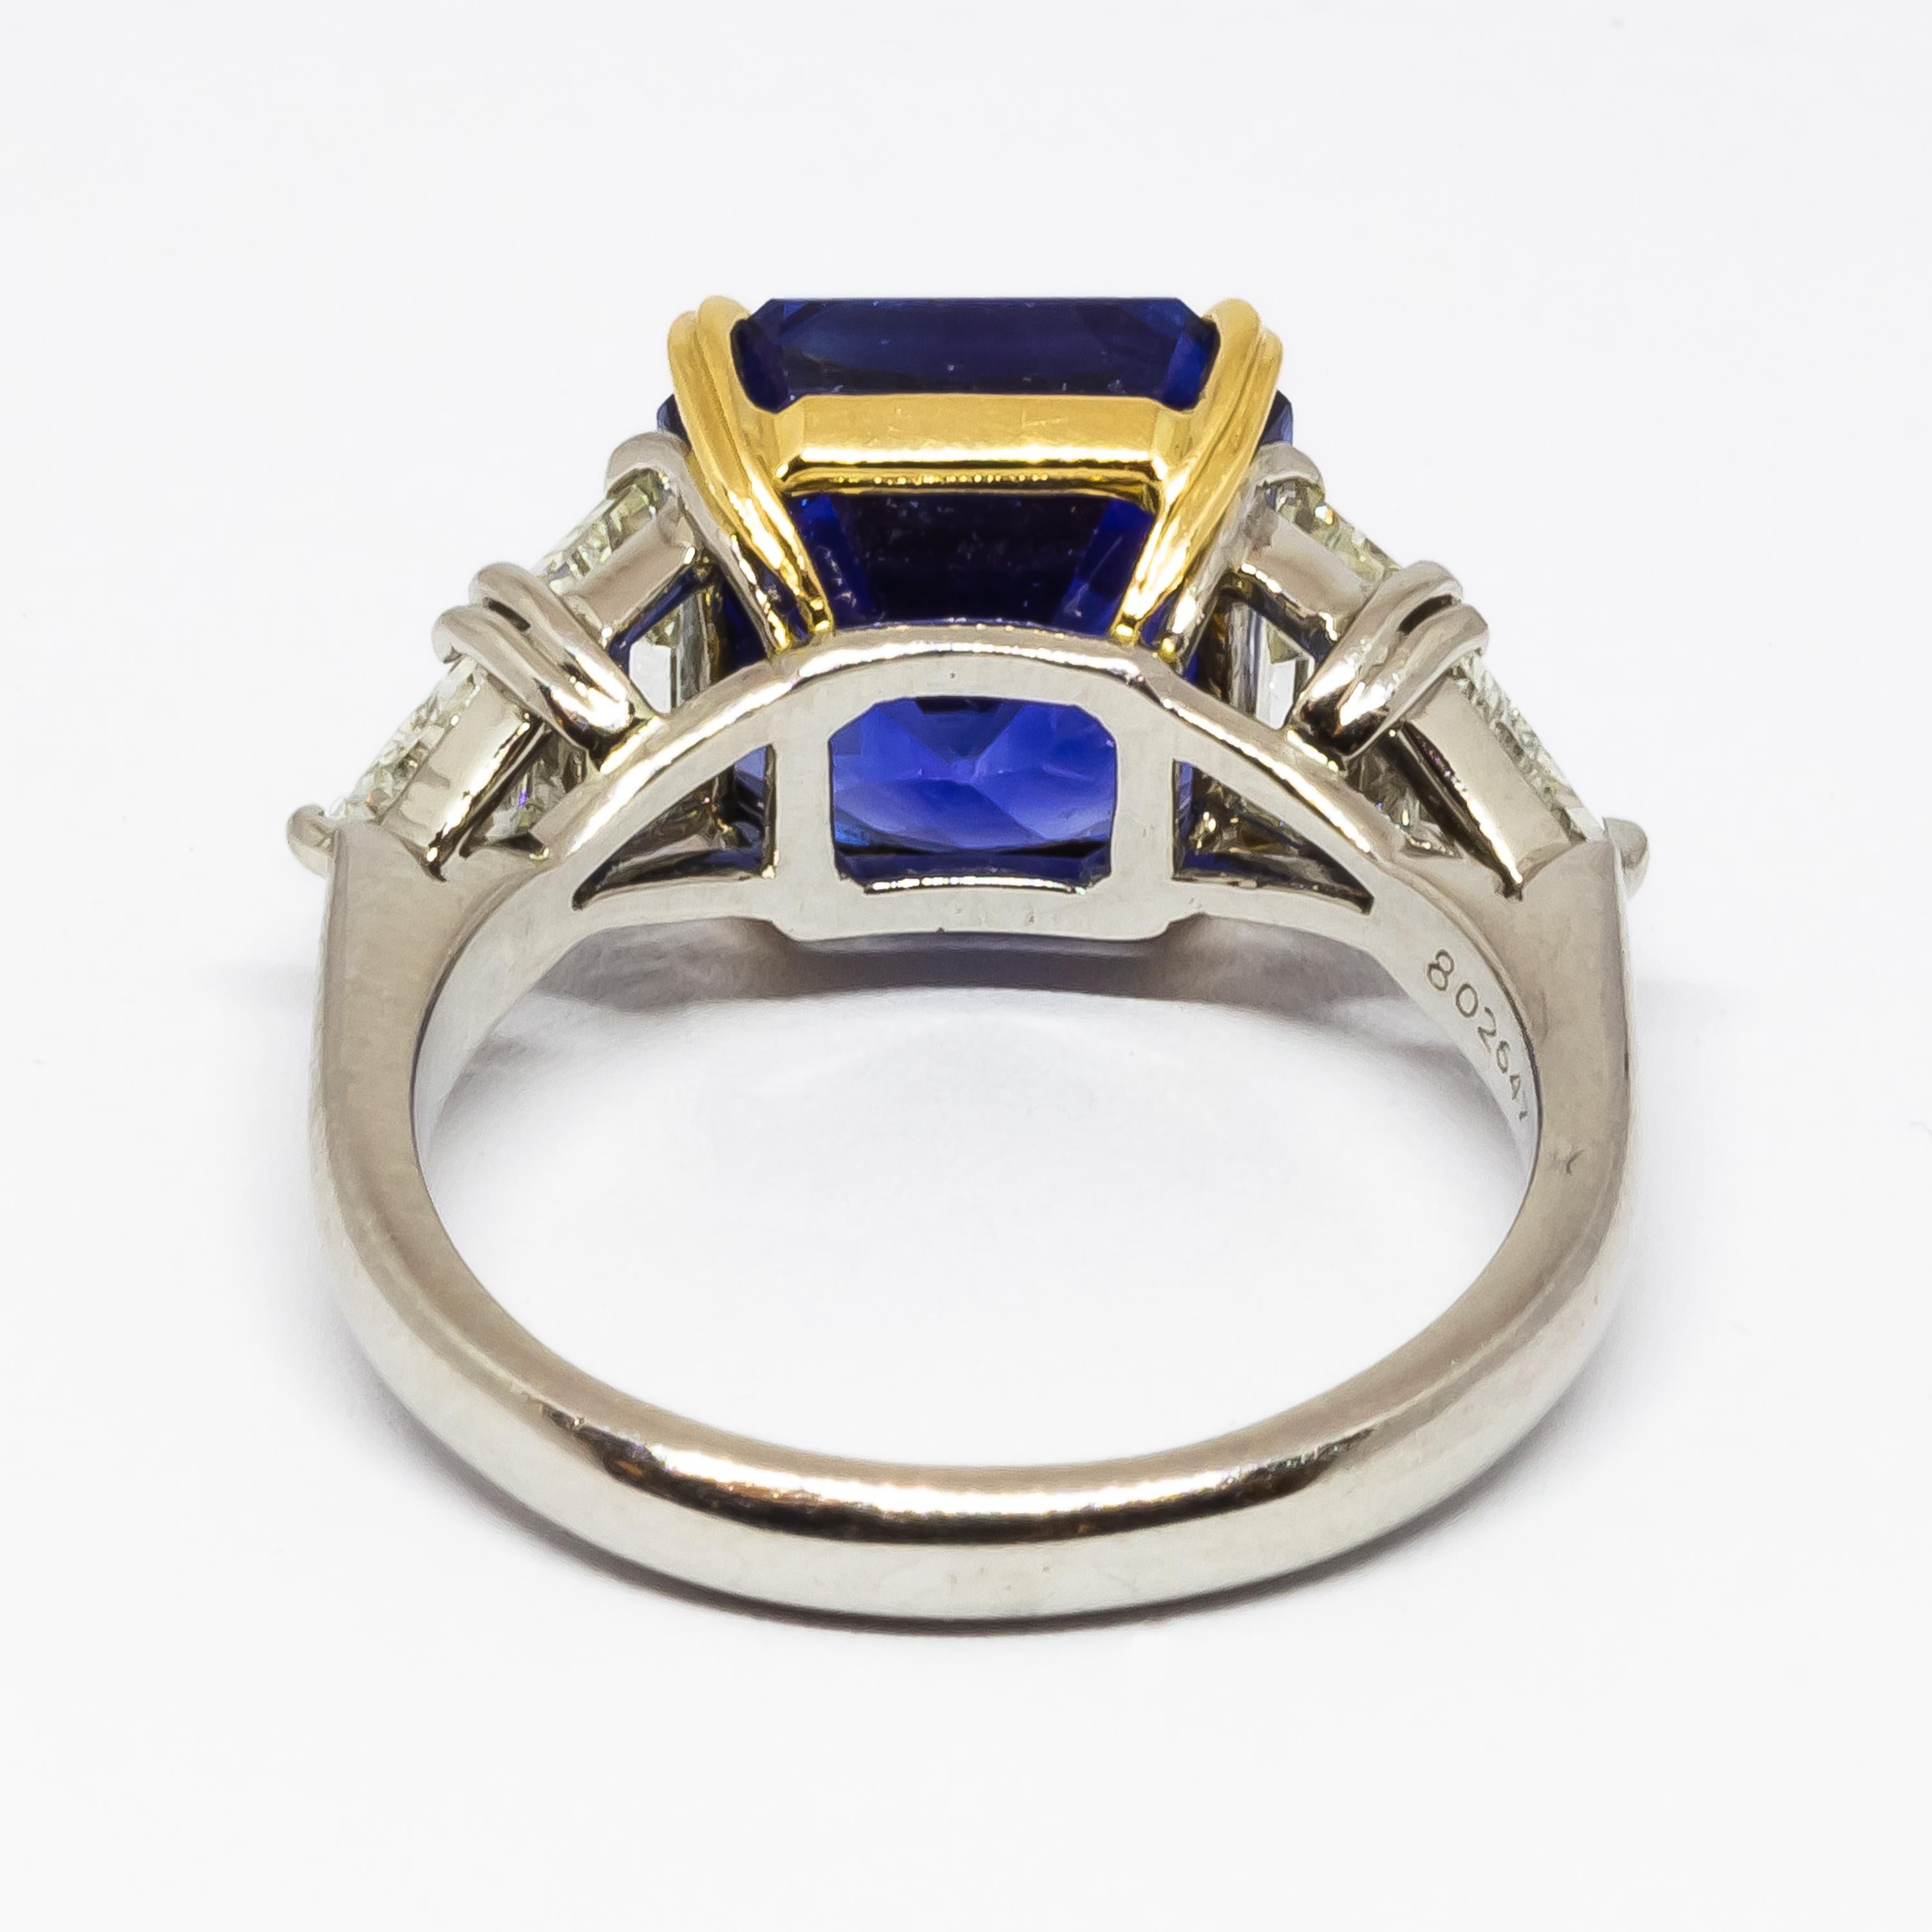 Cartier 7.51 Carat GIA Certified Burma Sapphire, Diamond, Gold and Platinum Ring For Sale 1